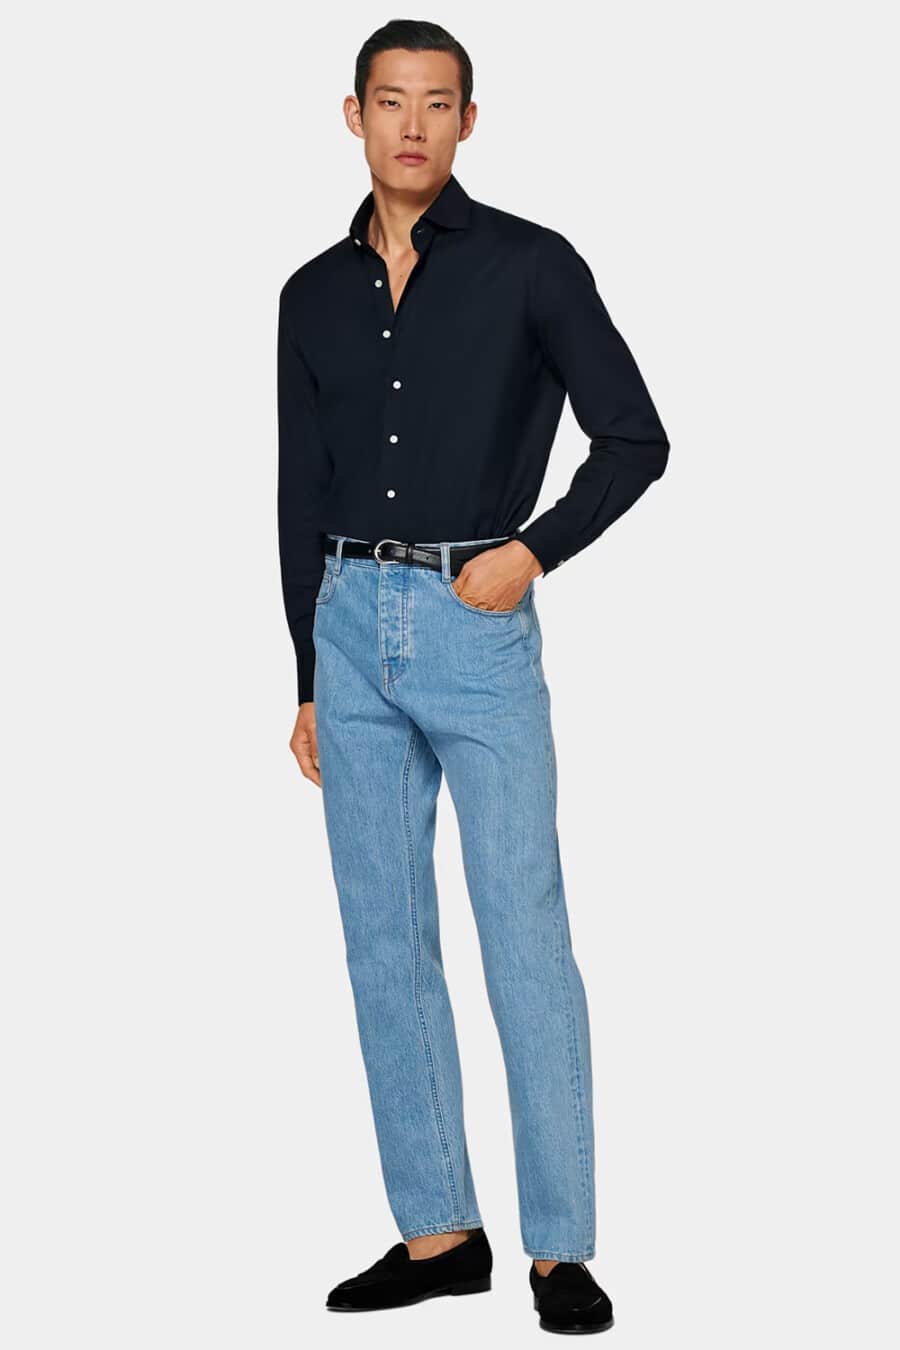 Men's light wash jeans, tucked in navy dress shirt, black leather belt and black suede Belgian loafers outfit